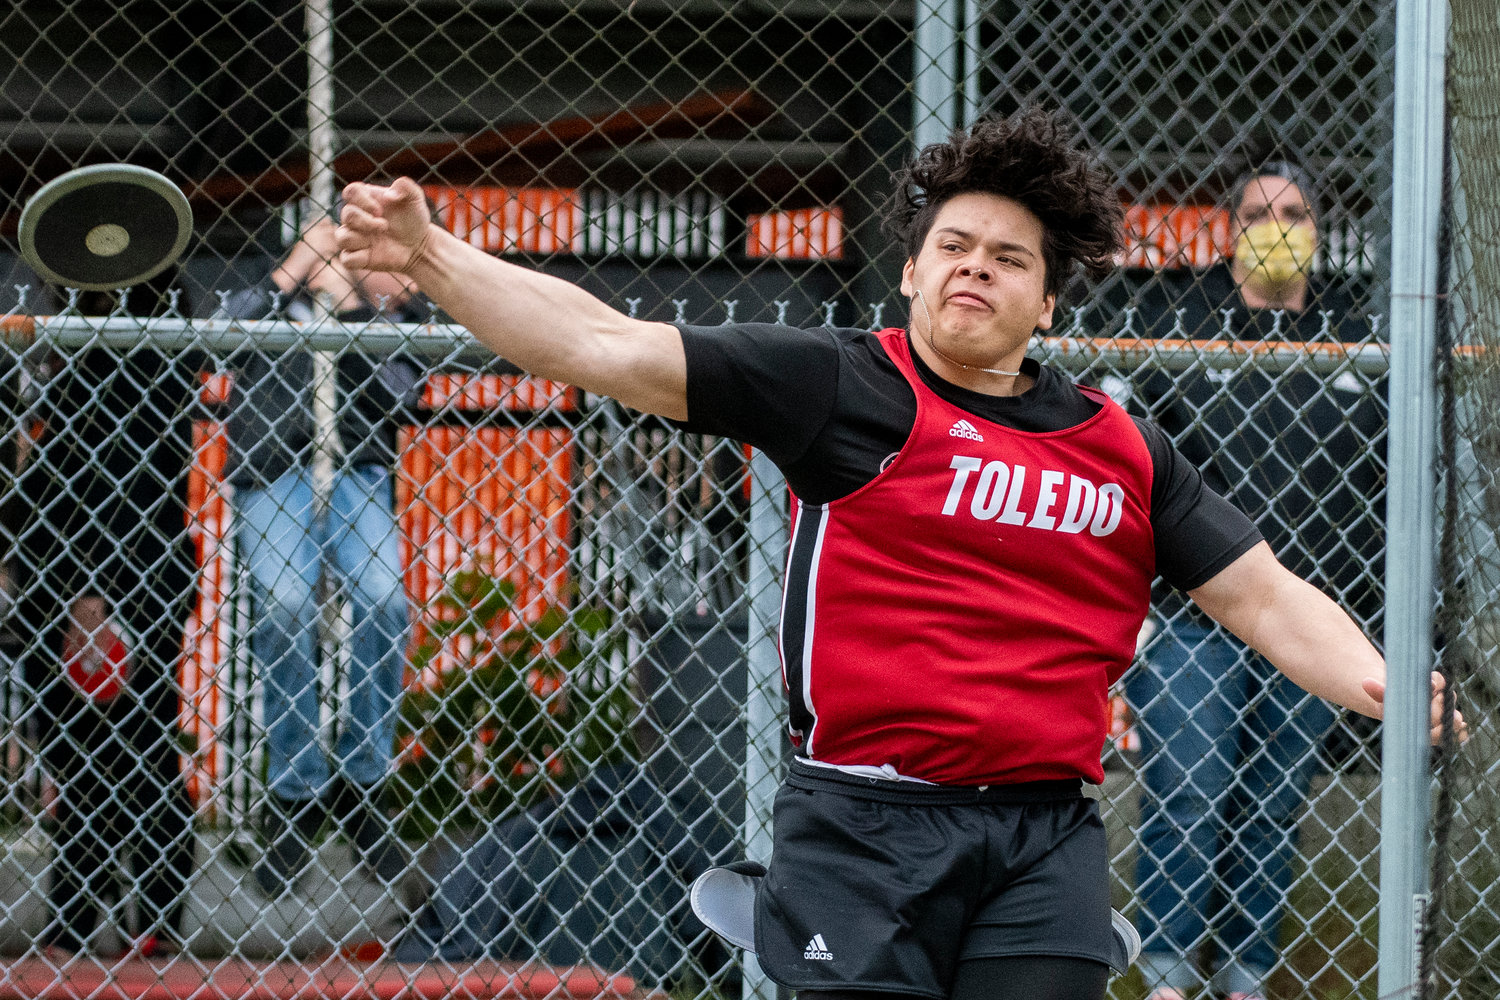 Toledo's Joshhill Tilton uncorks a discus throw during the Central 2B League Championships in Rainier on Friday, May 13.